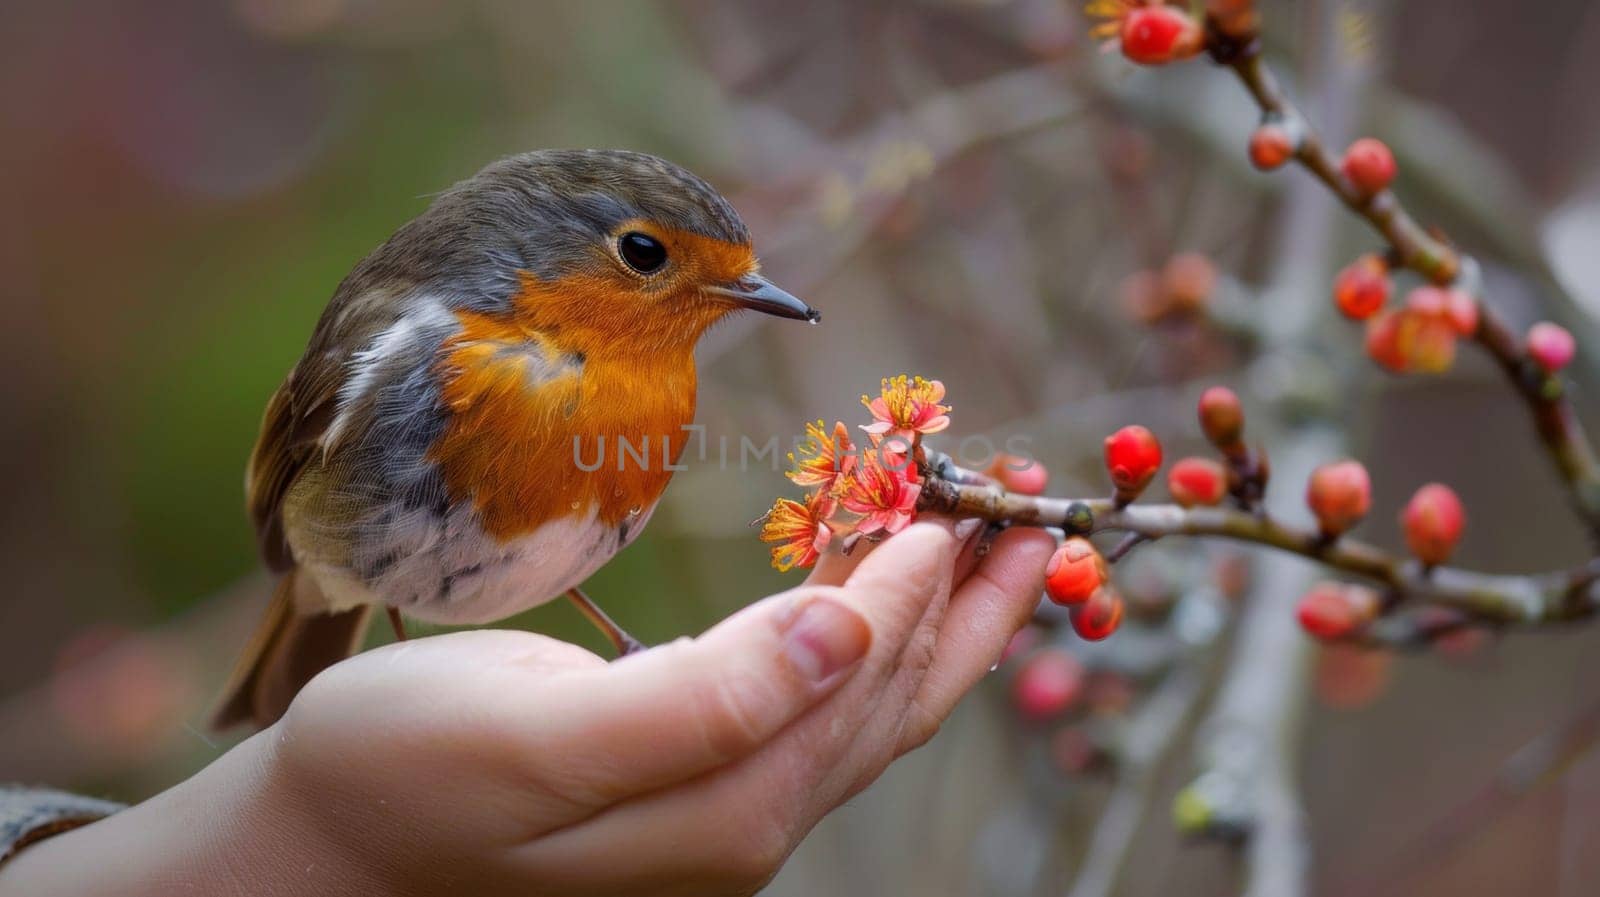 A small bird perched on a persons hand with flowers in the background, AI by starush